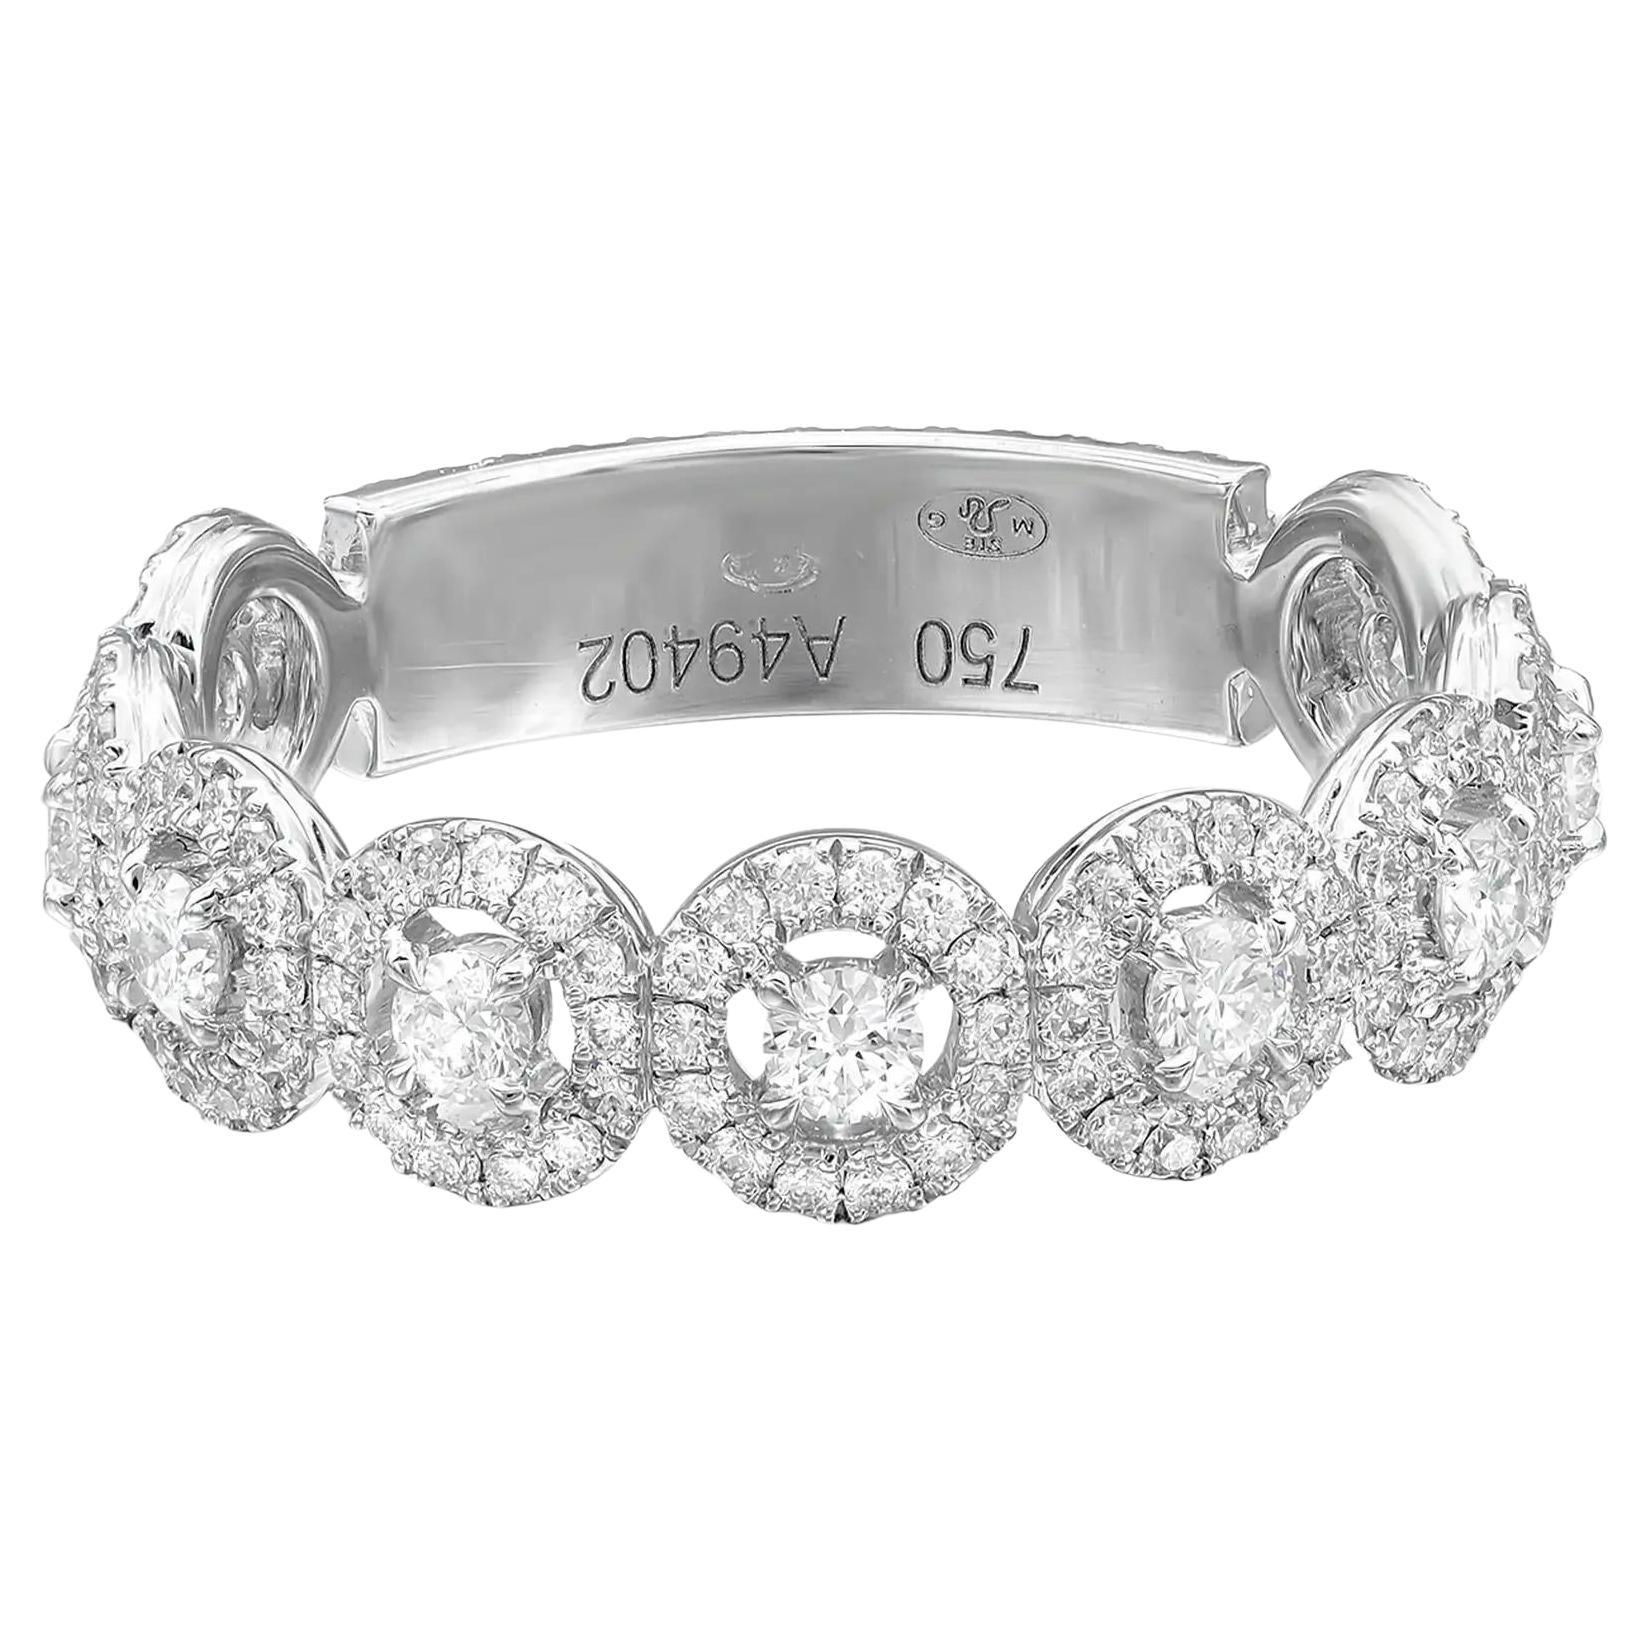 Messika 0.87Cttw All Joy Diamond Band Ring 18K White Gold Size 55 US 7.5 For Sale